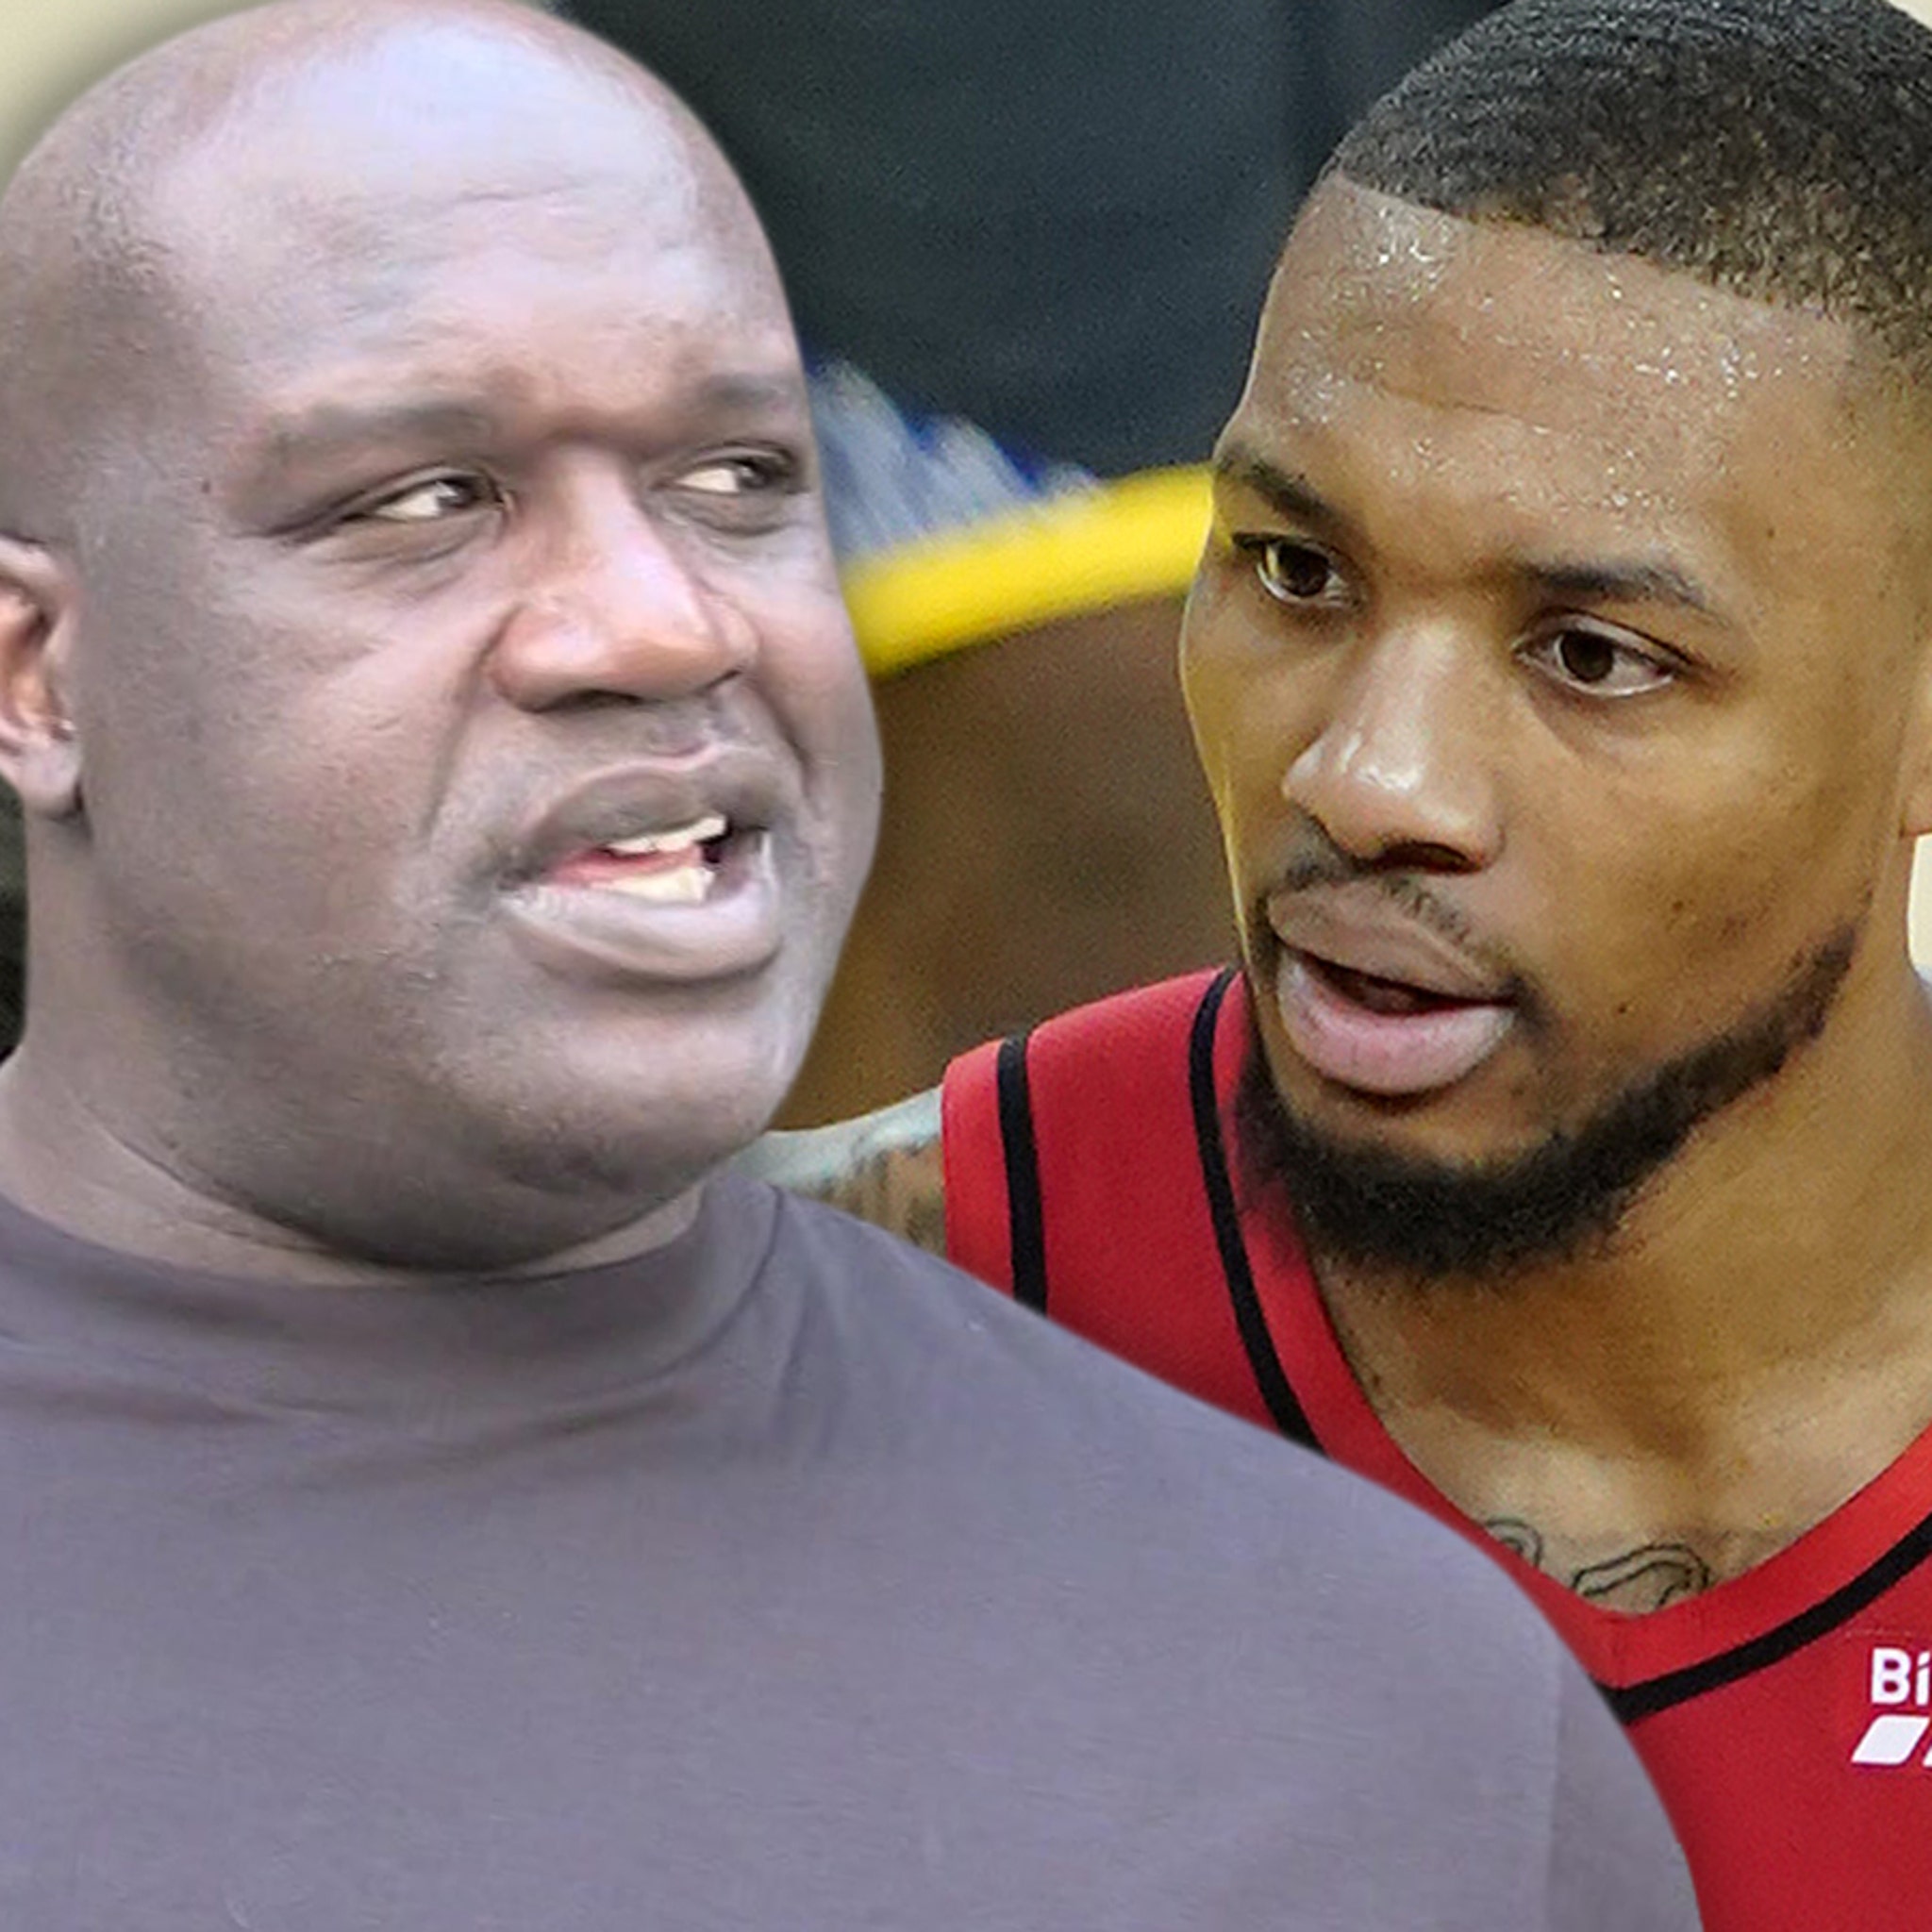 Flipboard: Shaq Drops Second Damian Lillard Diss Track, 'I Can See Your Tampon String'